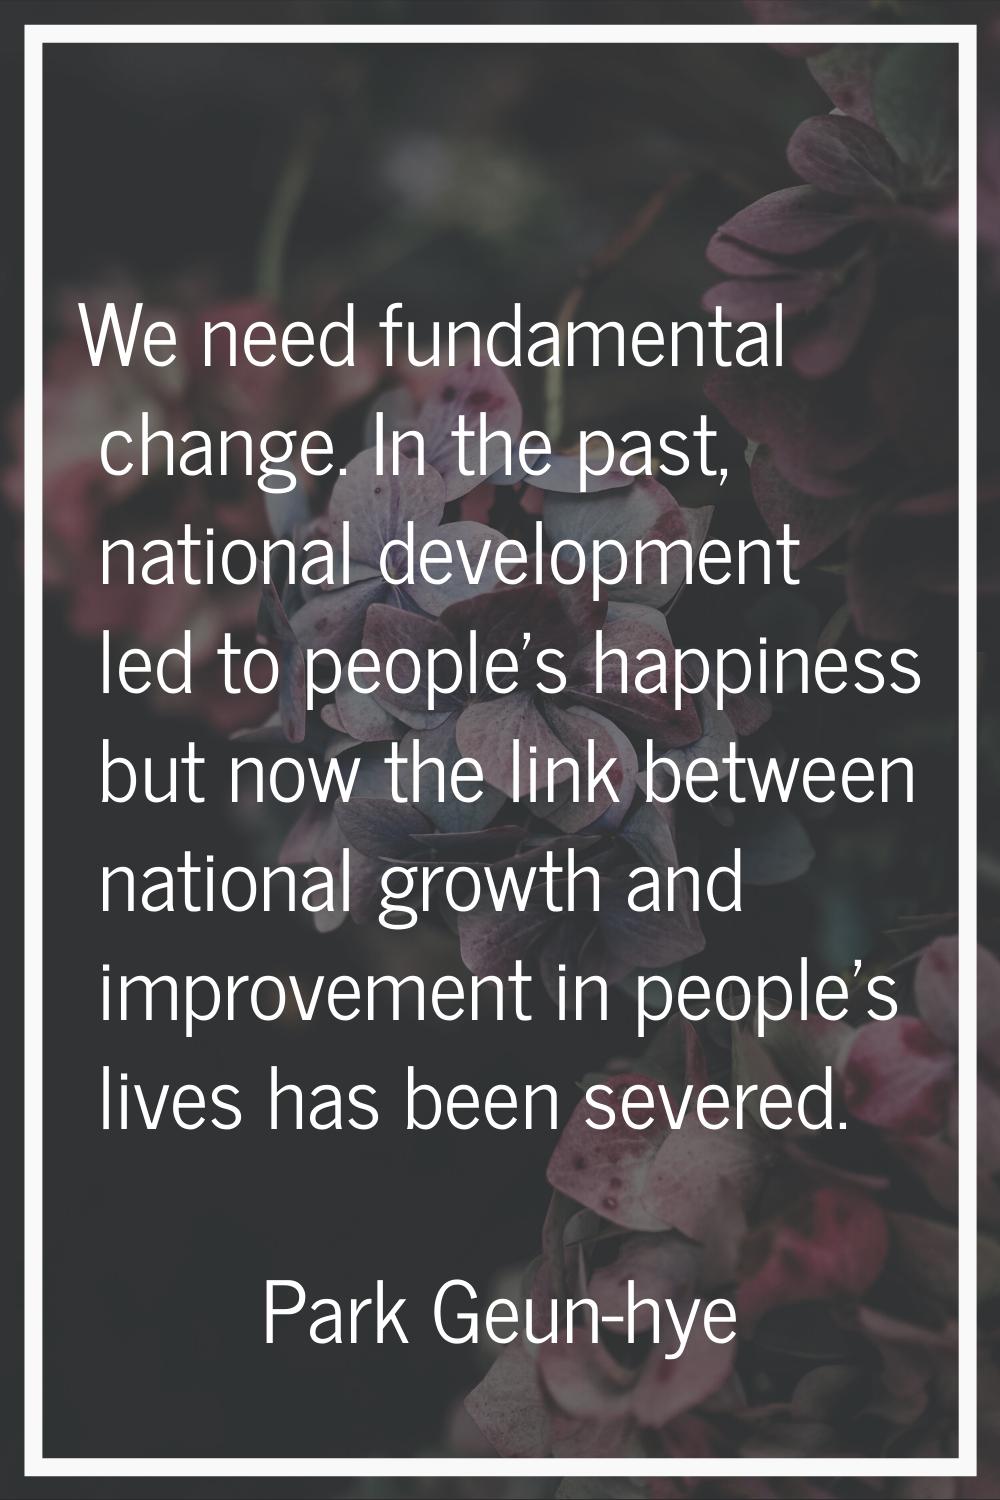 We need fundamental change. In the past, national development led to people's happiness but now the